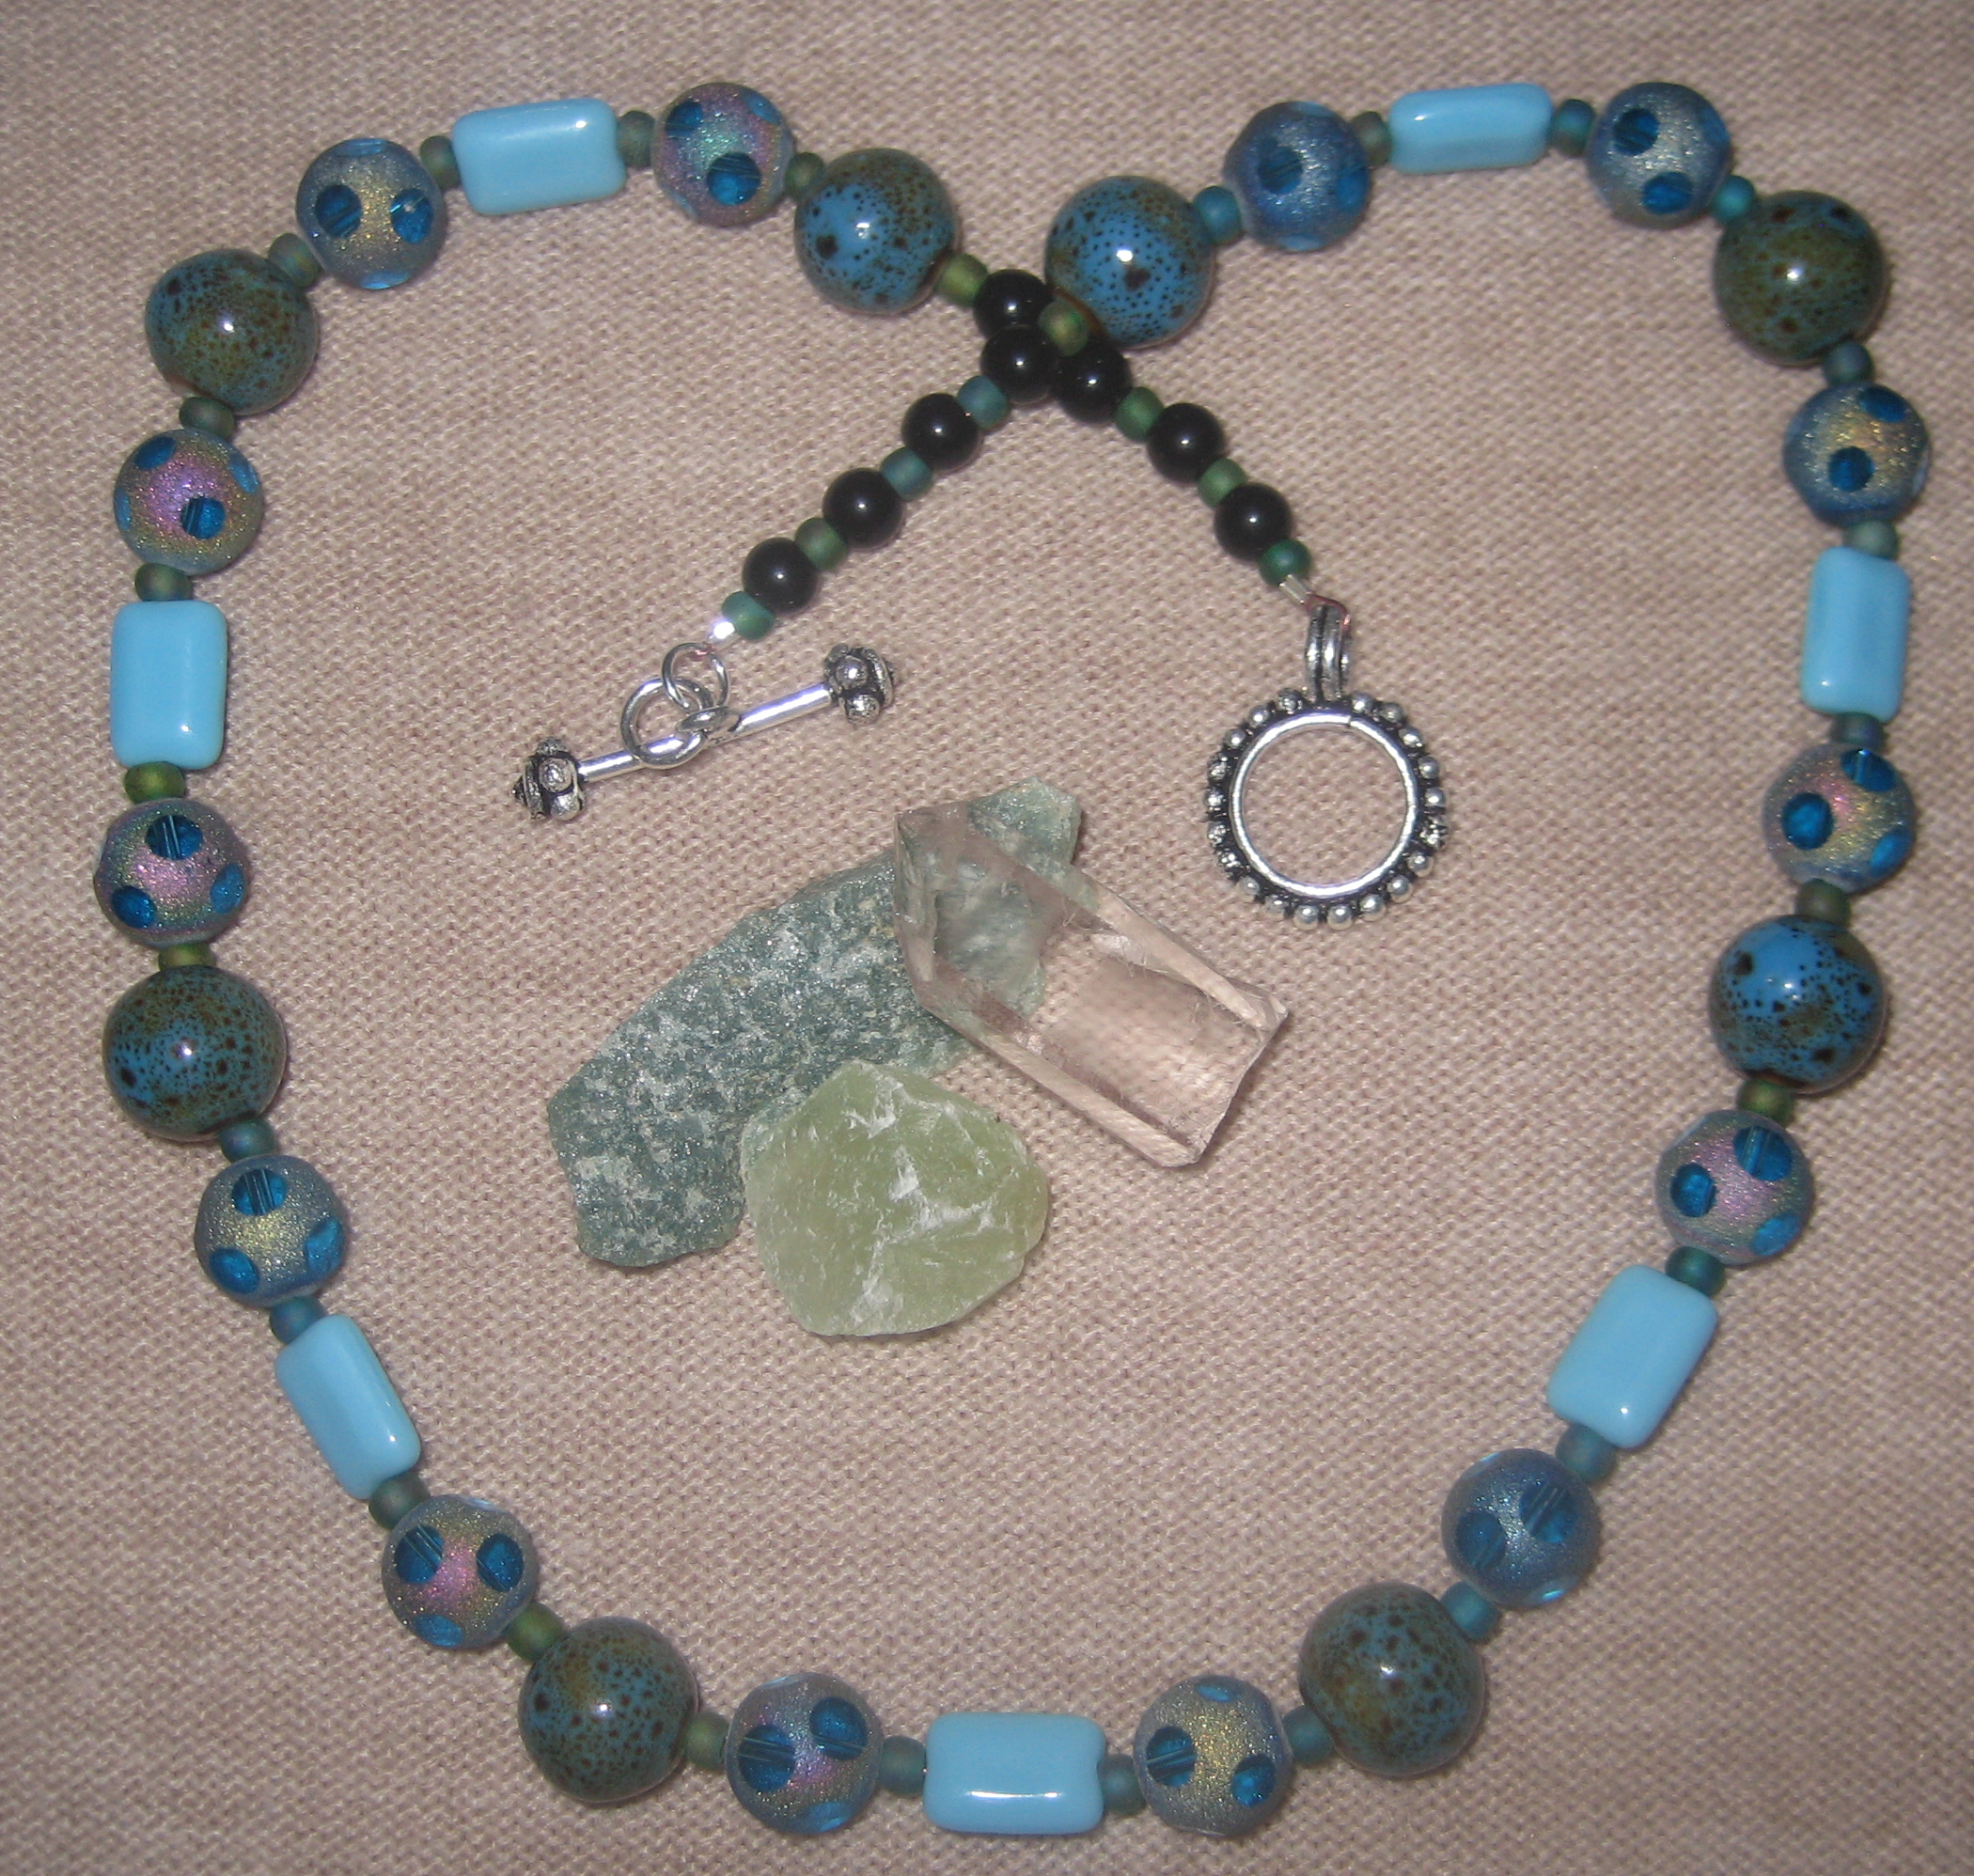 Pretty Blues, Greens and Turquoise Tones--Vibrant Necklace